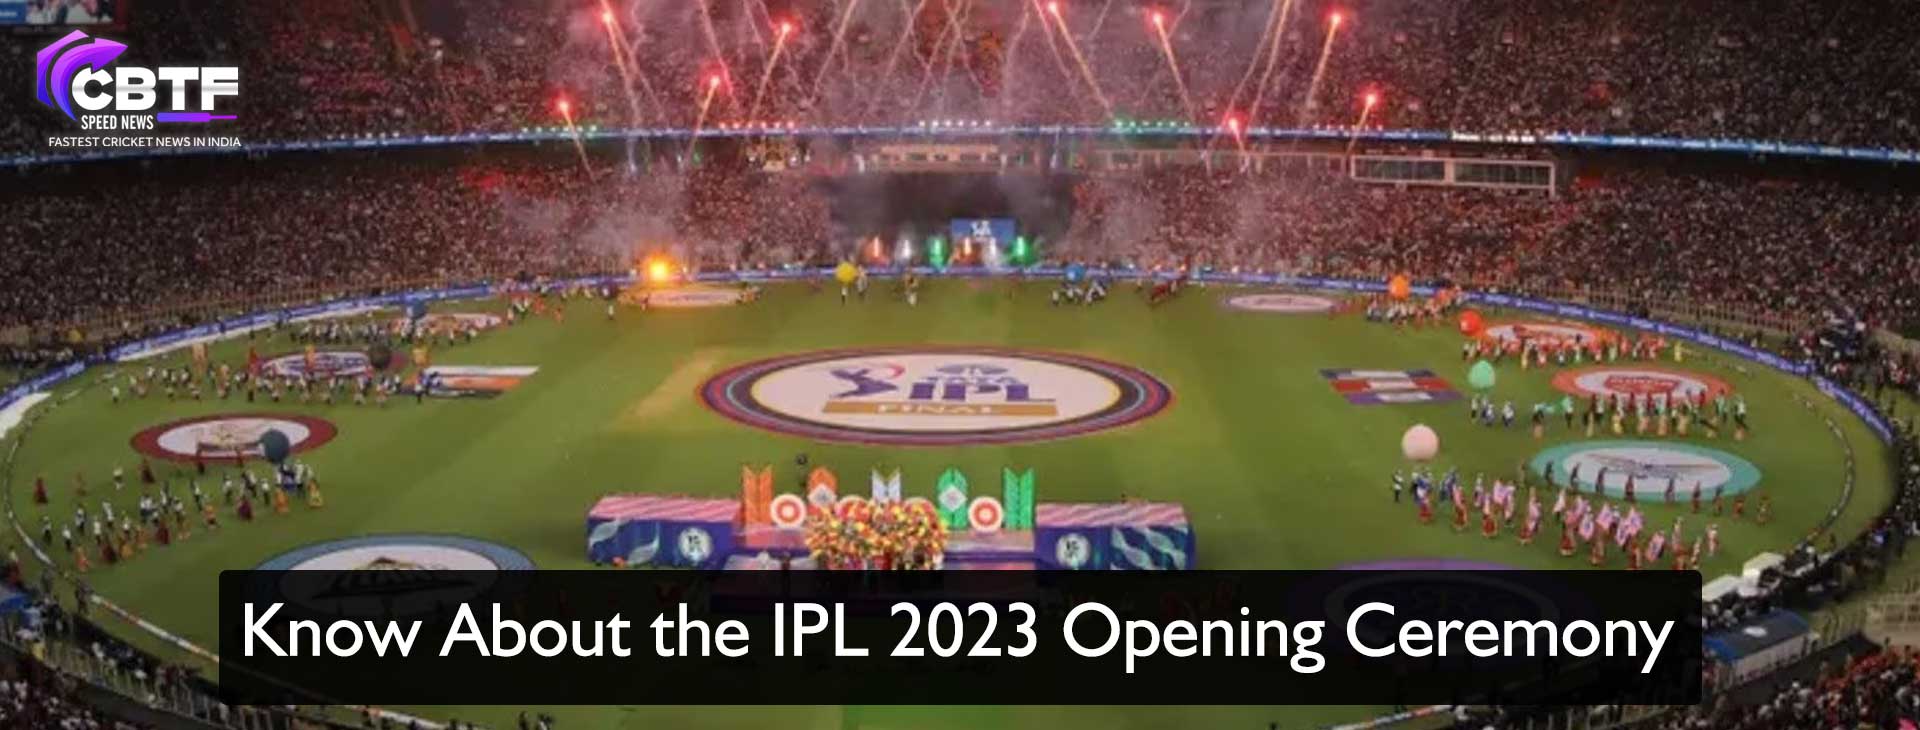 Know About the IPL 2023 Opening Ceremony